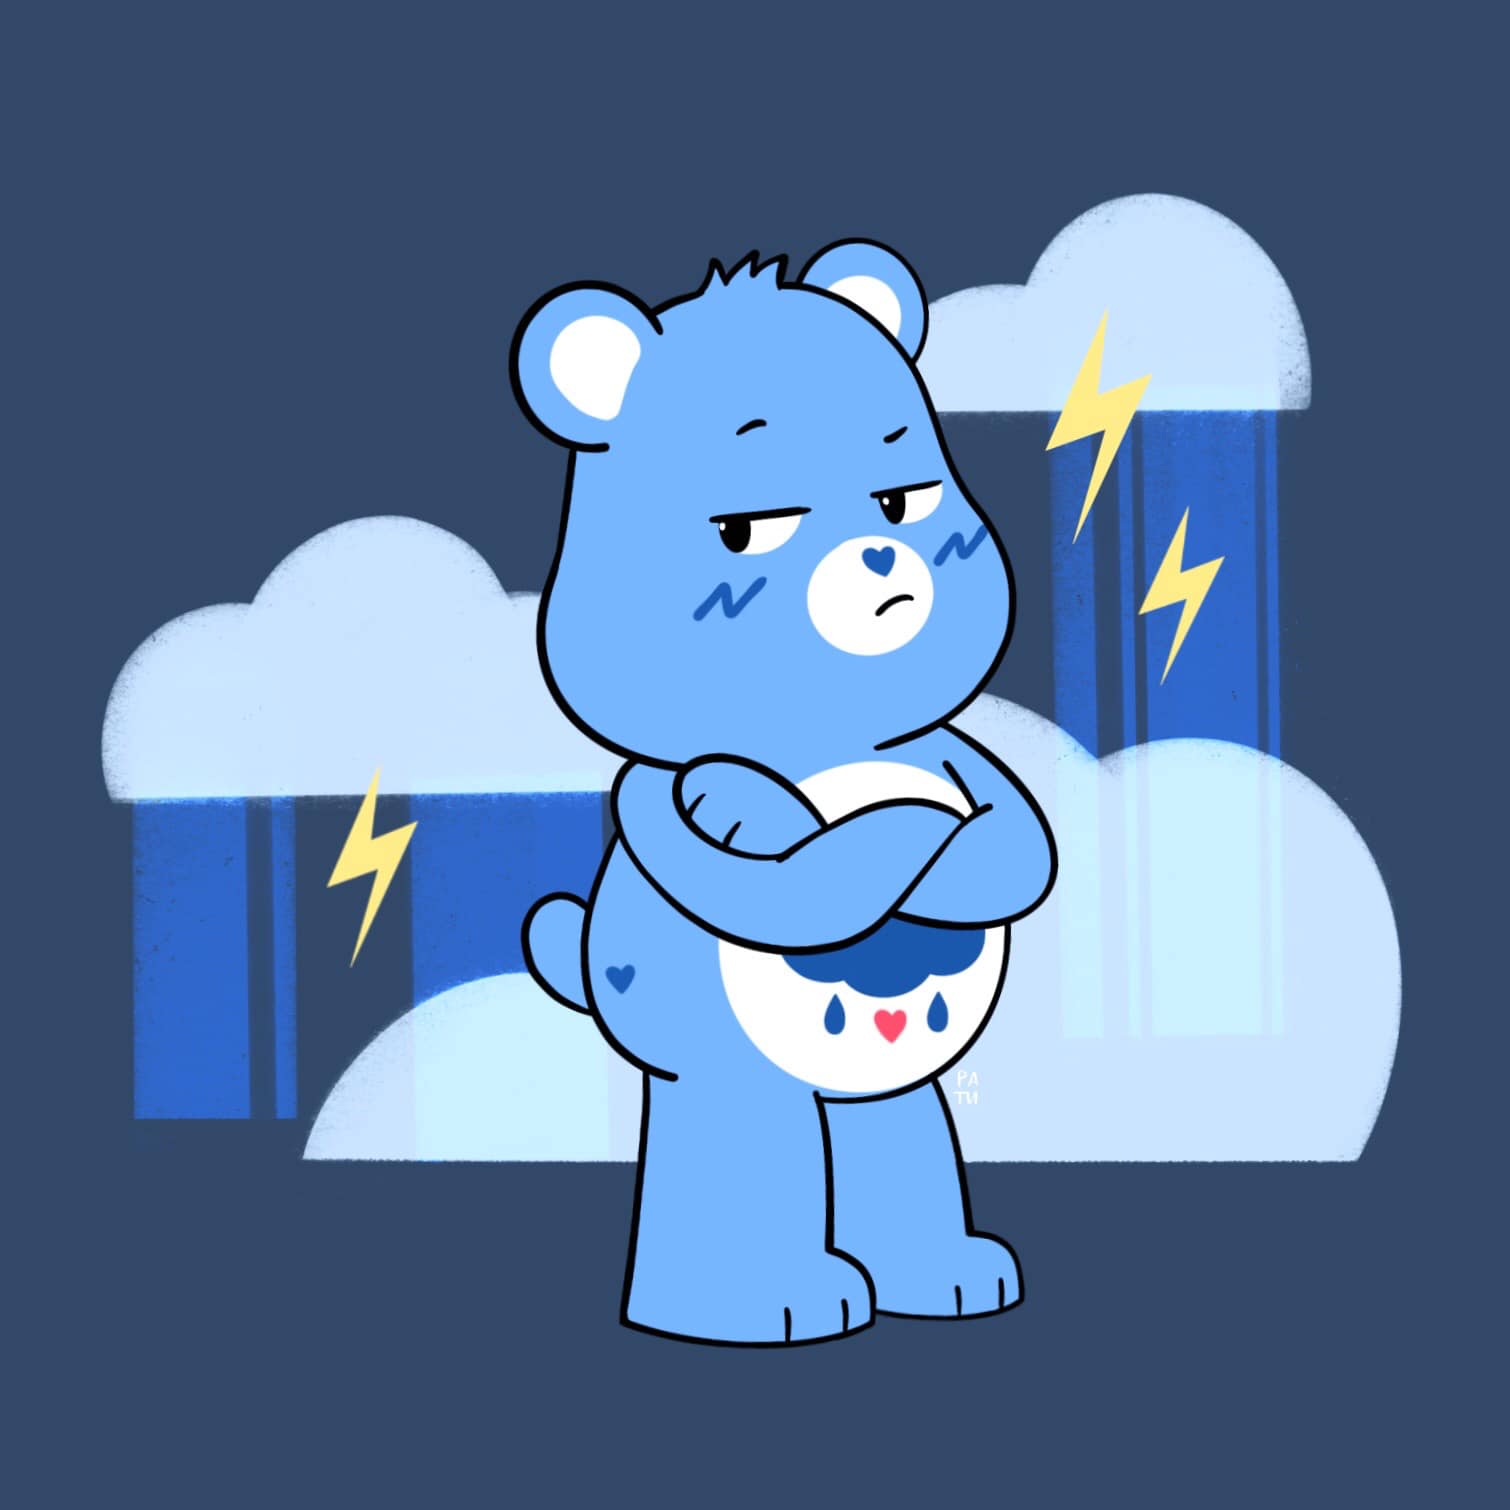 Care Bears Grumpy Is Feeling A Little Moody This Morning